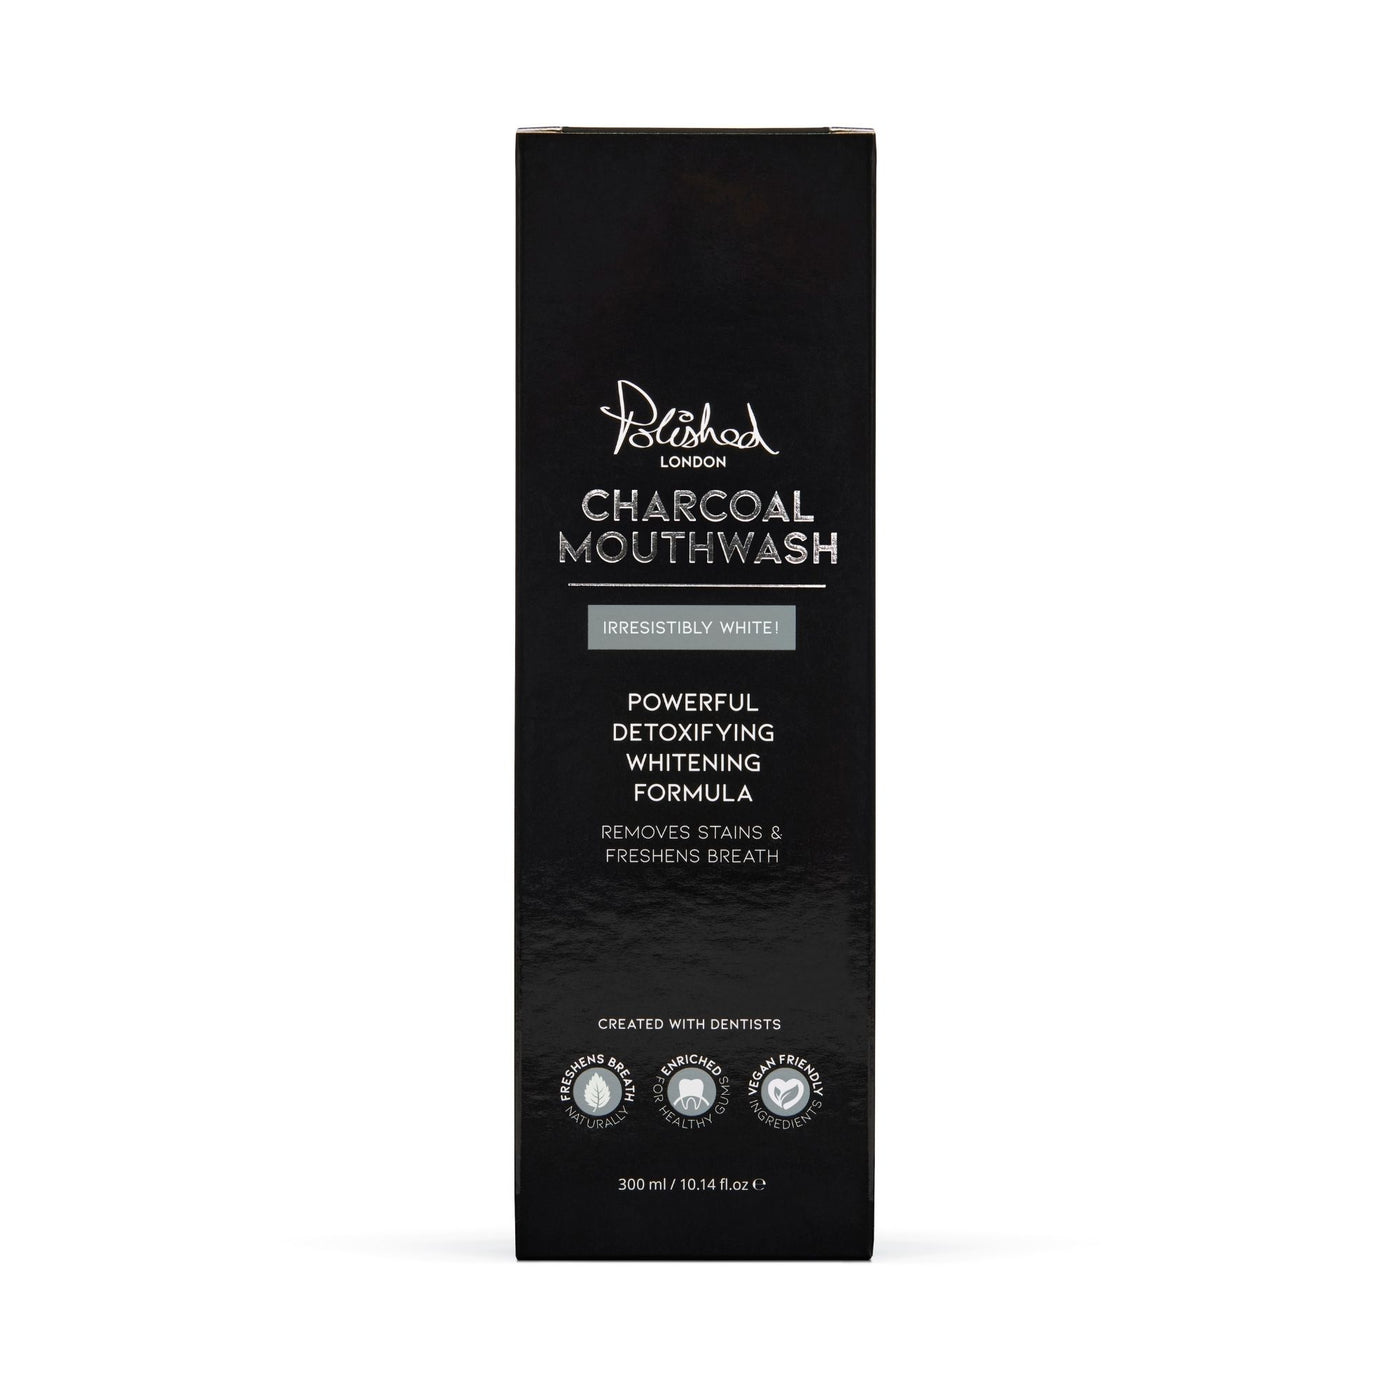 Polished London - Activated Charcoal Mouthwash 300ml